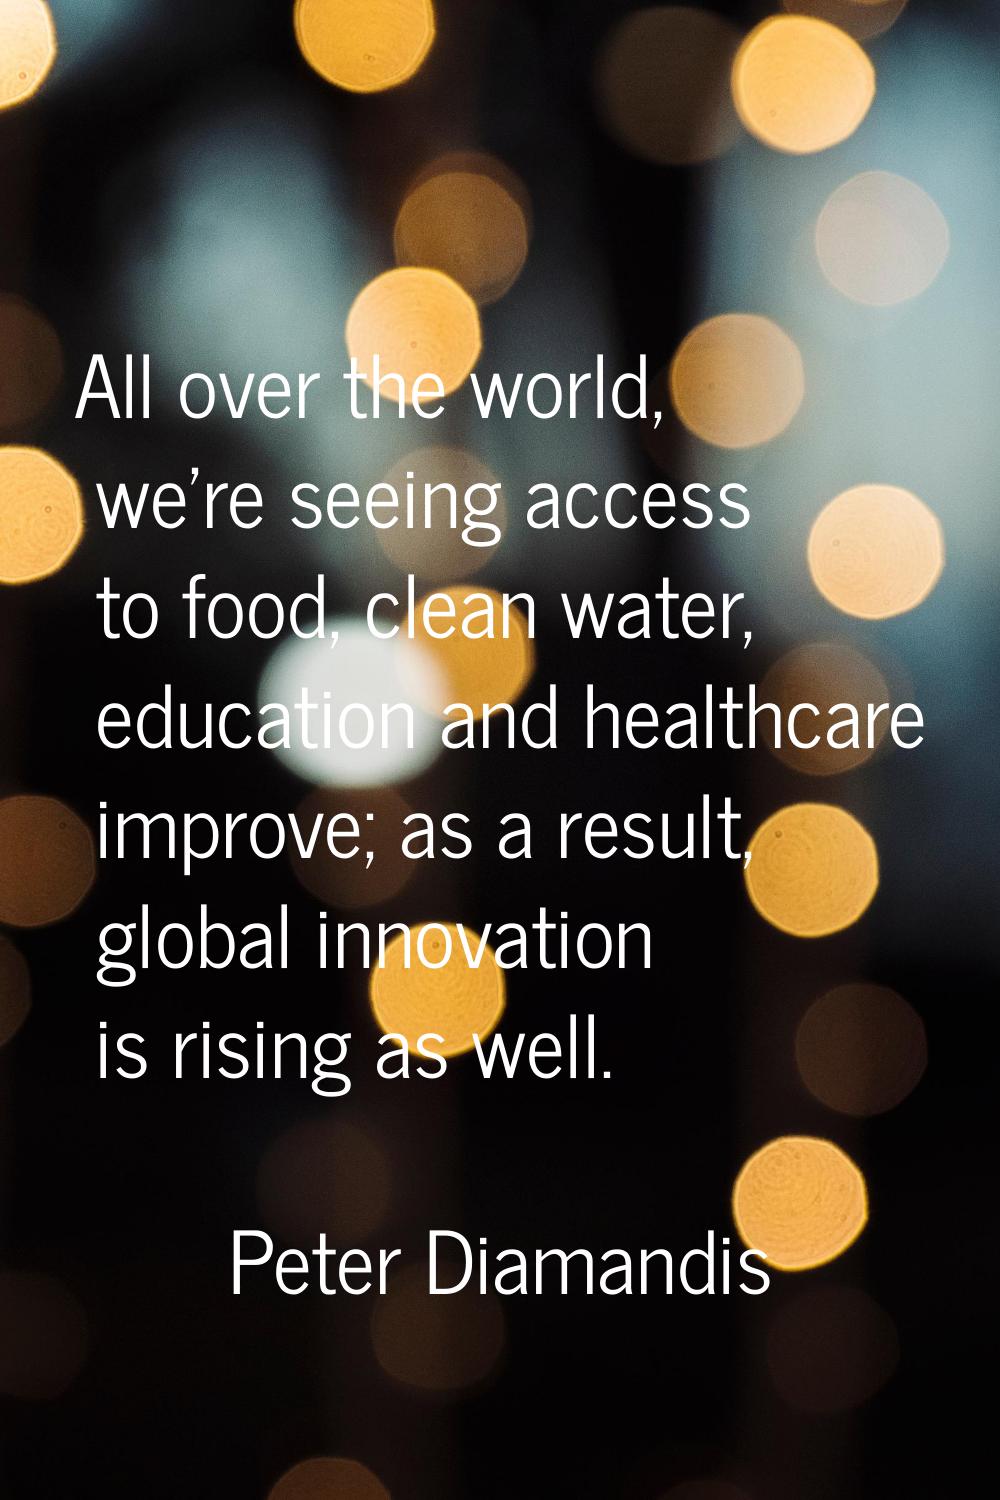 All over the world, we're seeing access to food, clean water, education and healthcare improve; as 